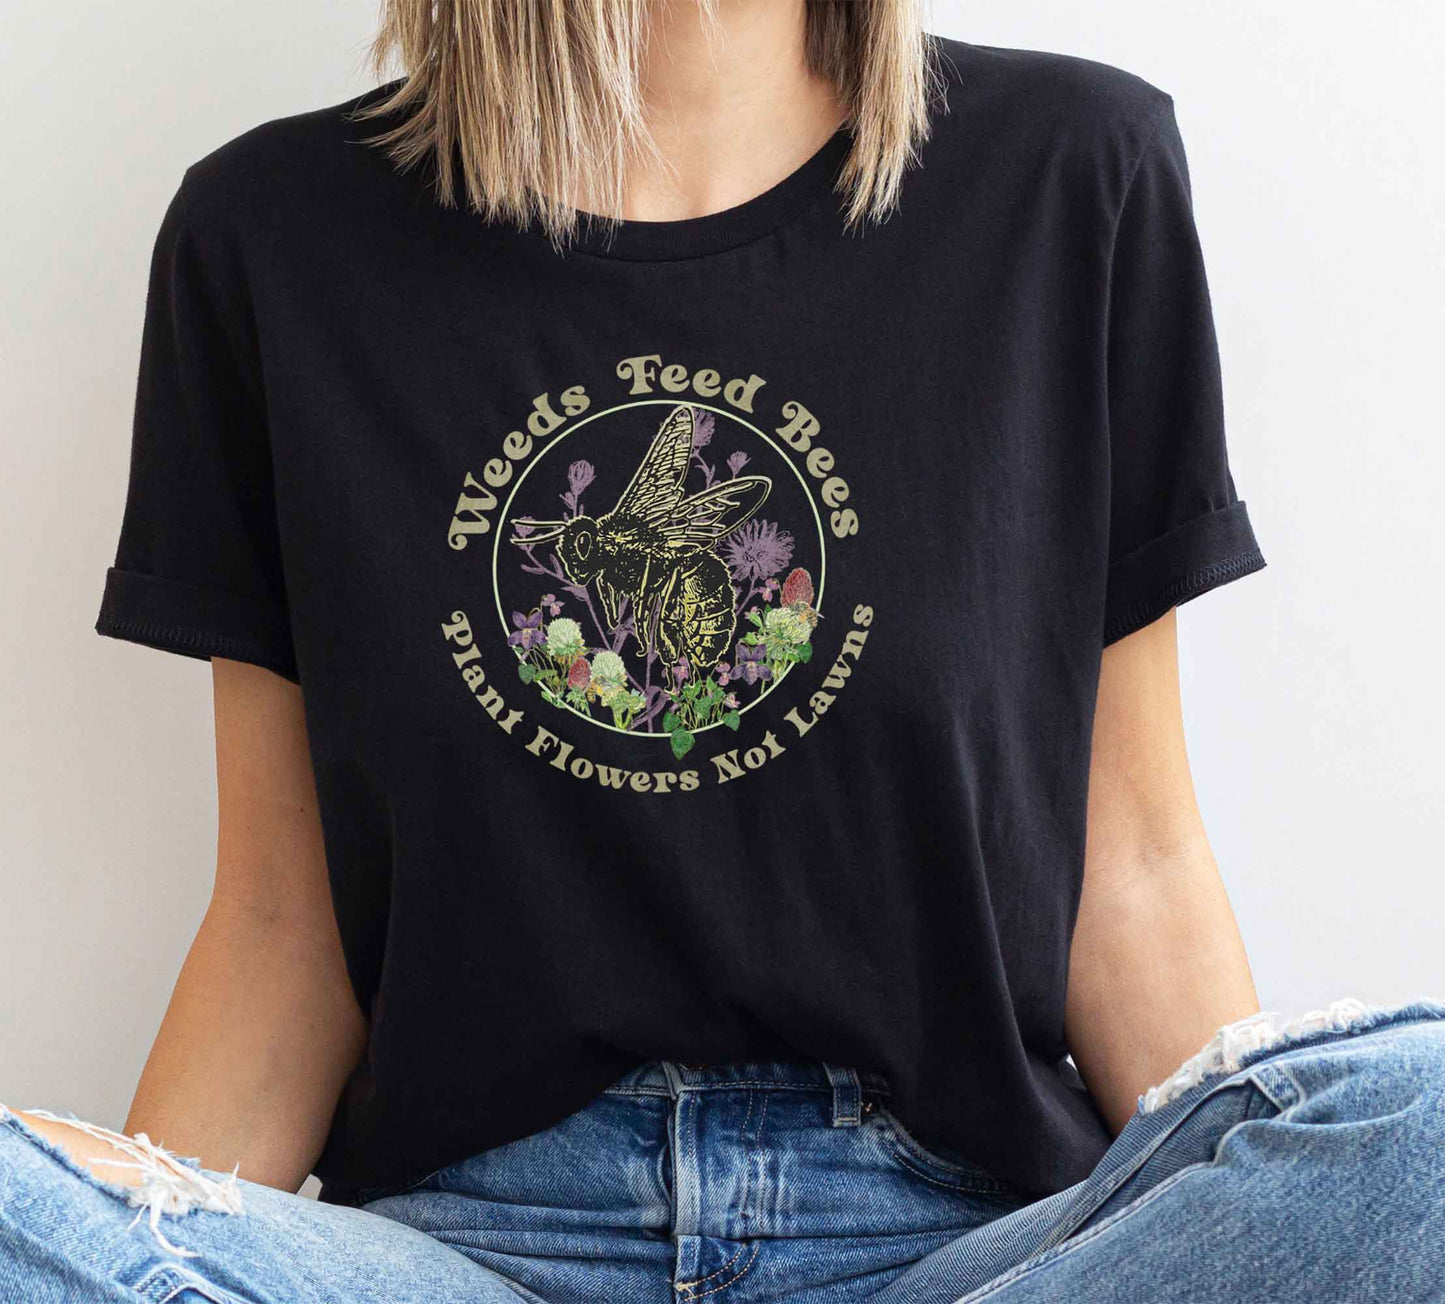 Weeds Feed Bees Pollinator Shirt, Save the Bees, Plant Native, Reduce Your Lawns, Conservation Save the Earth